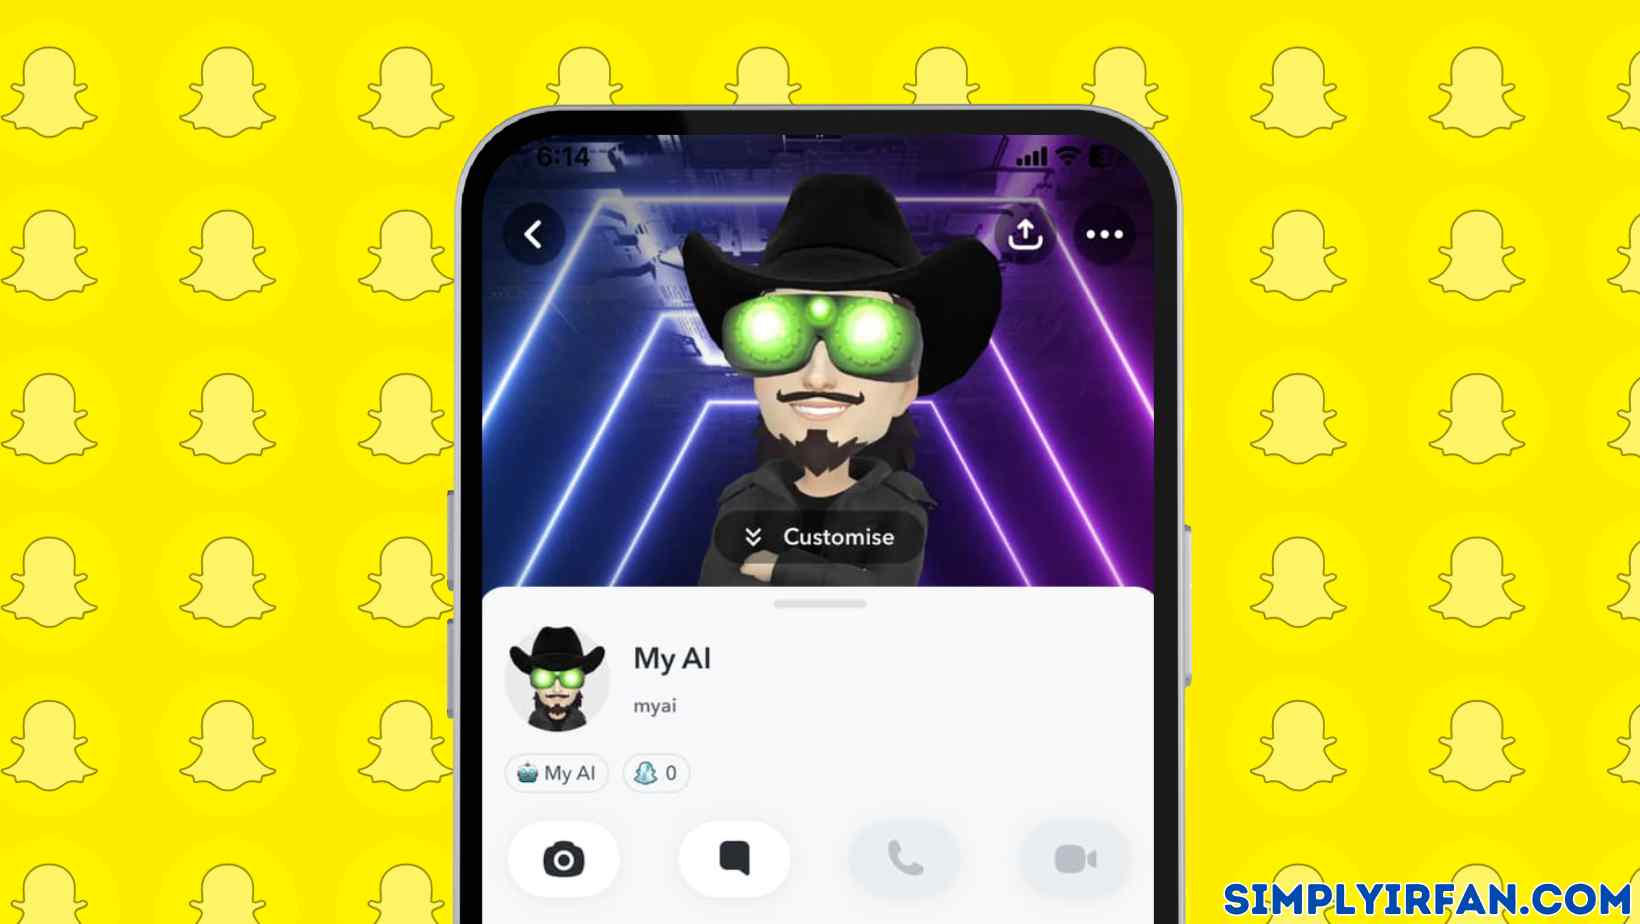 How to Get My AI on Snapchat on Android or iPhone